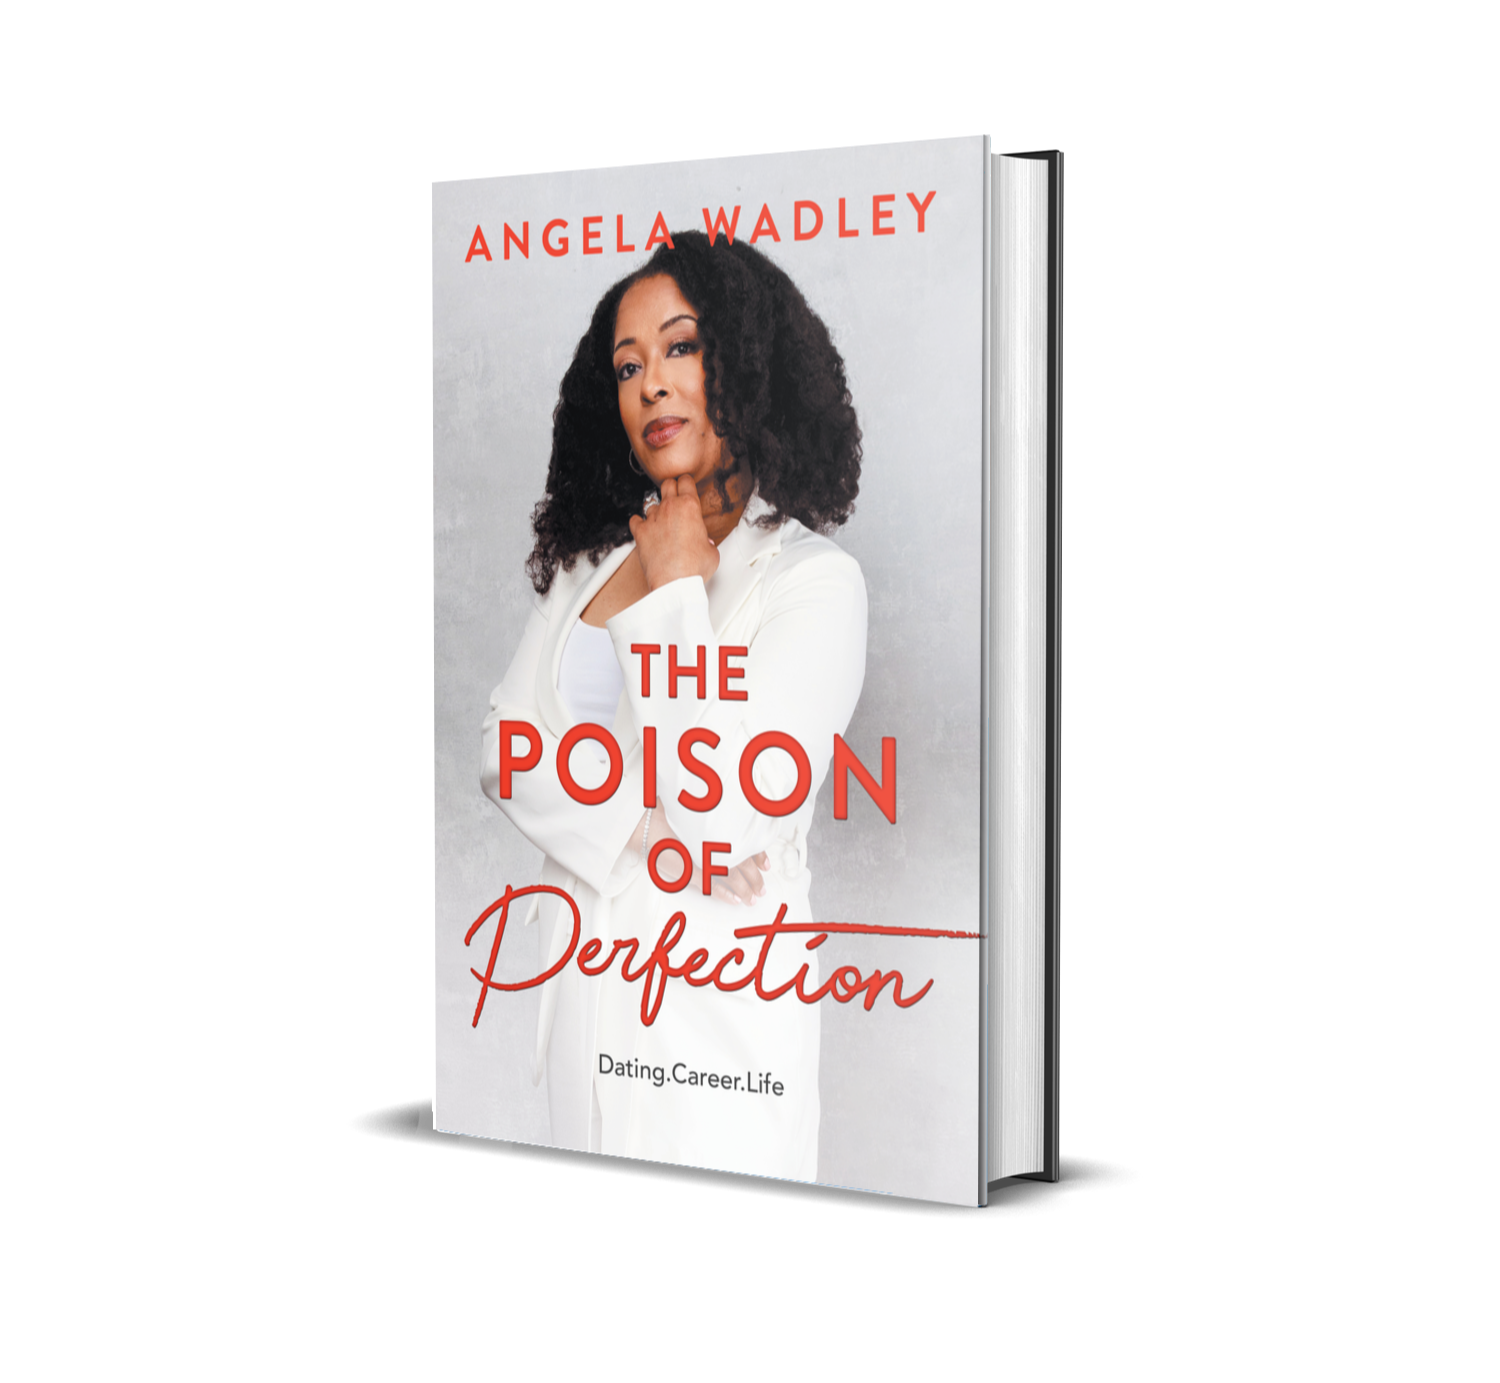 Author and NLP Coach Angela Wadley Releases New Book "The Poison of Perfection" to Rave Reviews